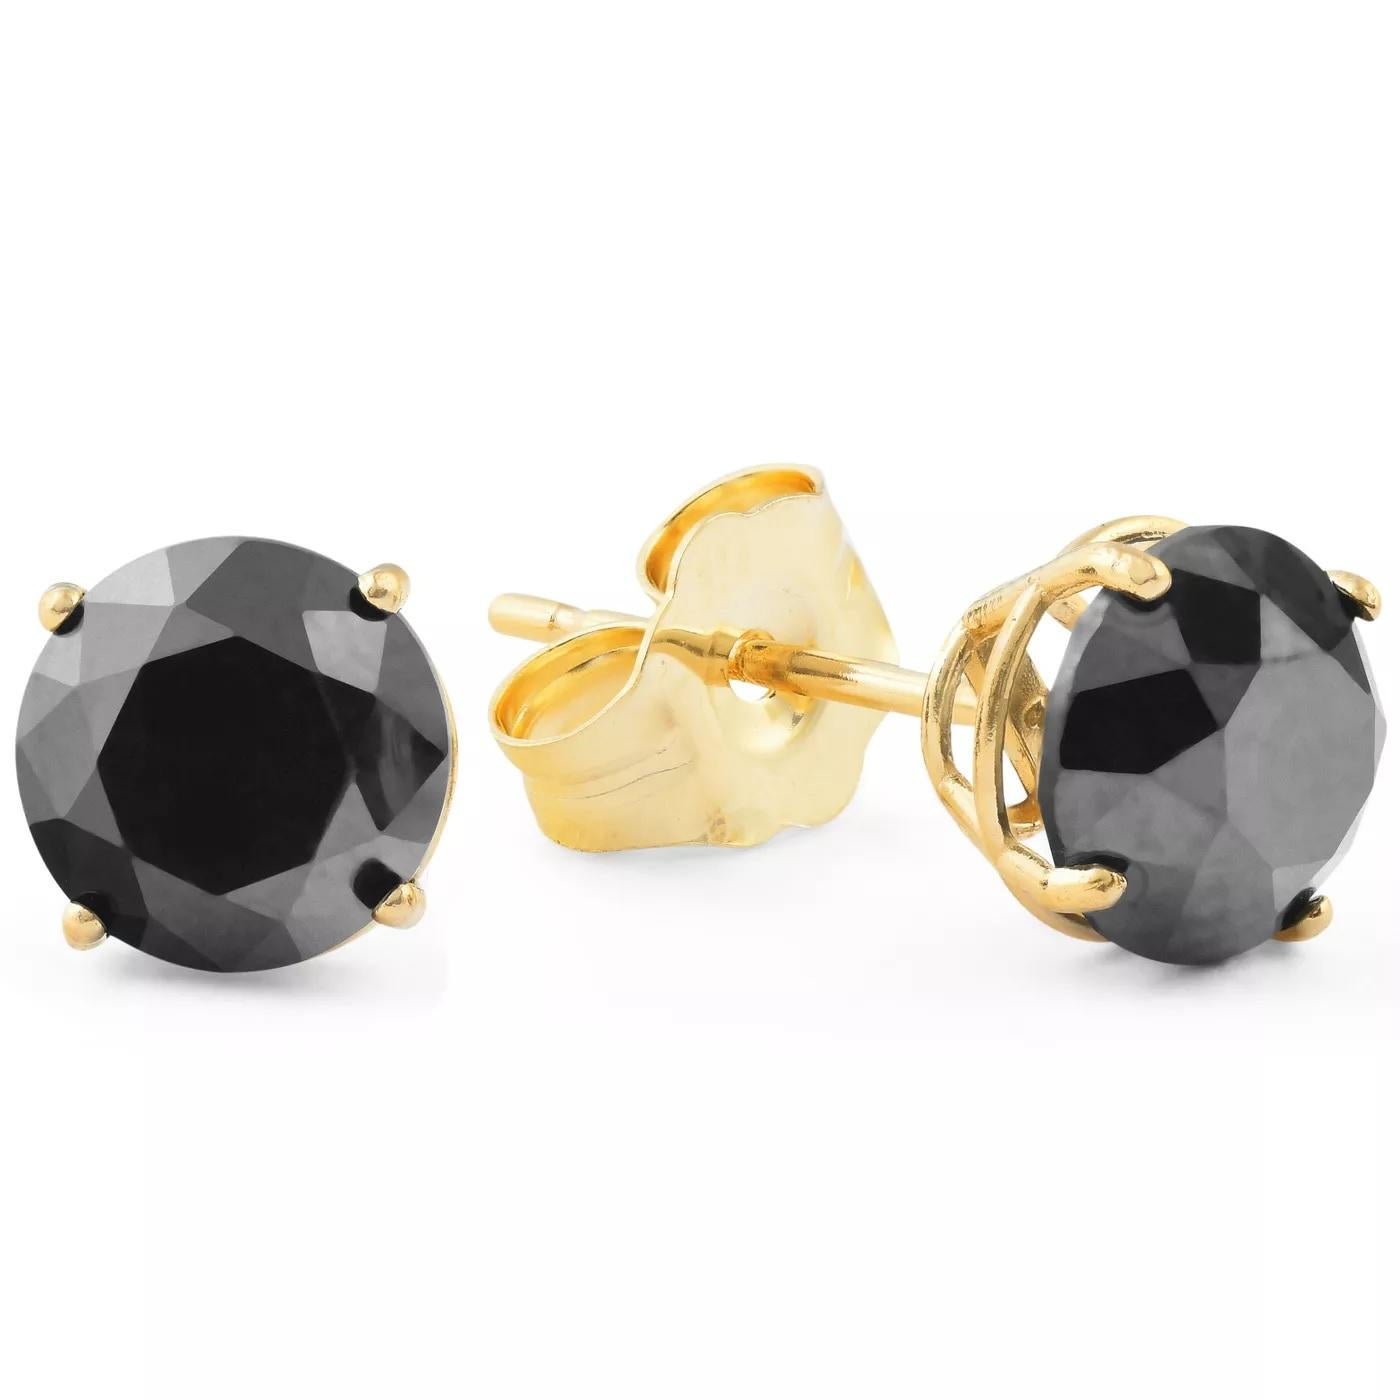 Alluring and refined, these diamond stud earrings are sure to be noticed. Created in 14 K yellow gold, the earring showcases a beguiling 1.58 carat natural black diamond solitaire measuring 6.78 x 6.79 x 5.11mm. Exquisitely made and Captivating with